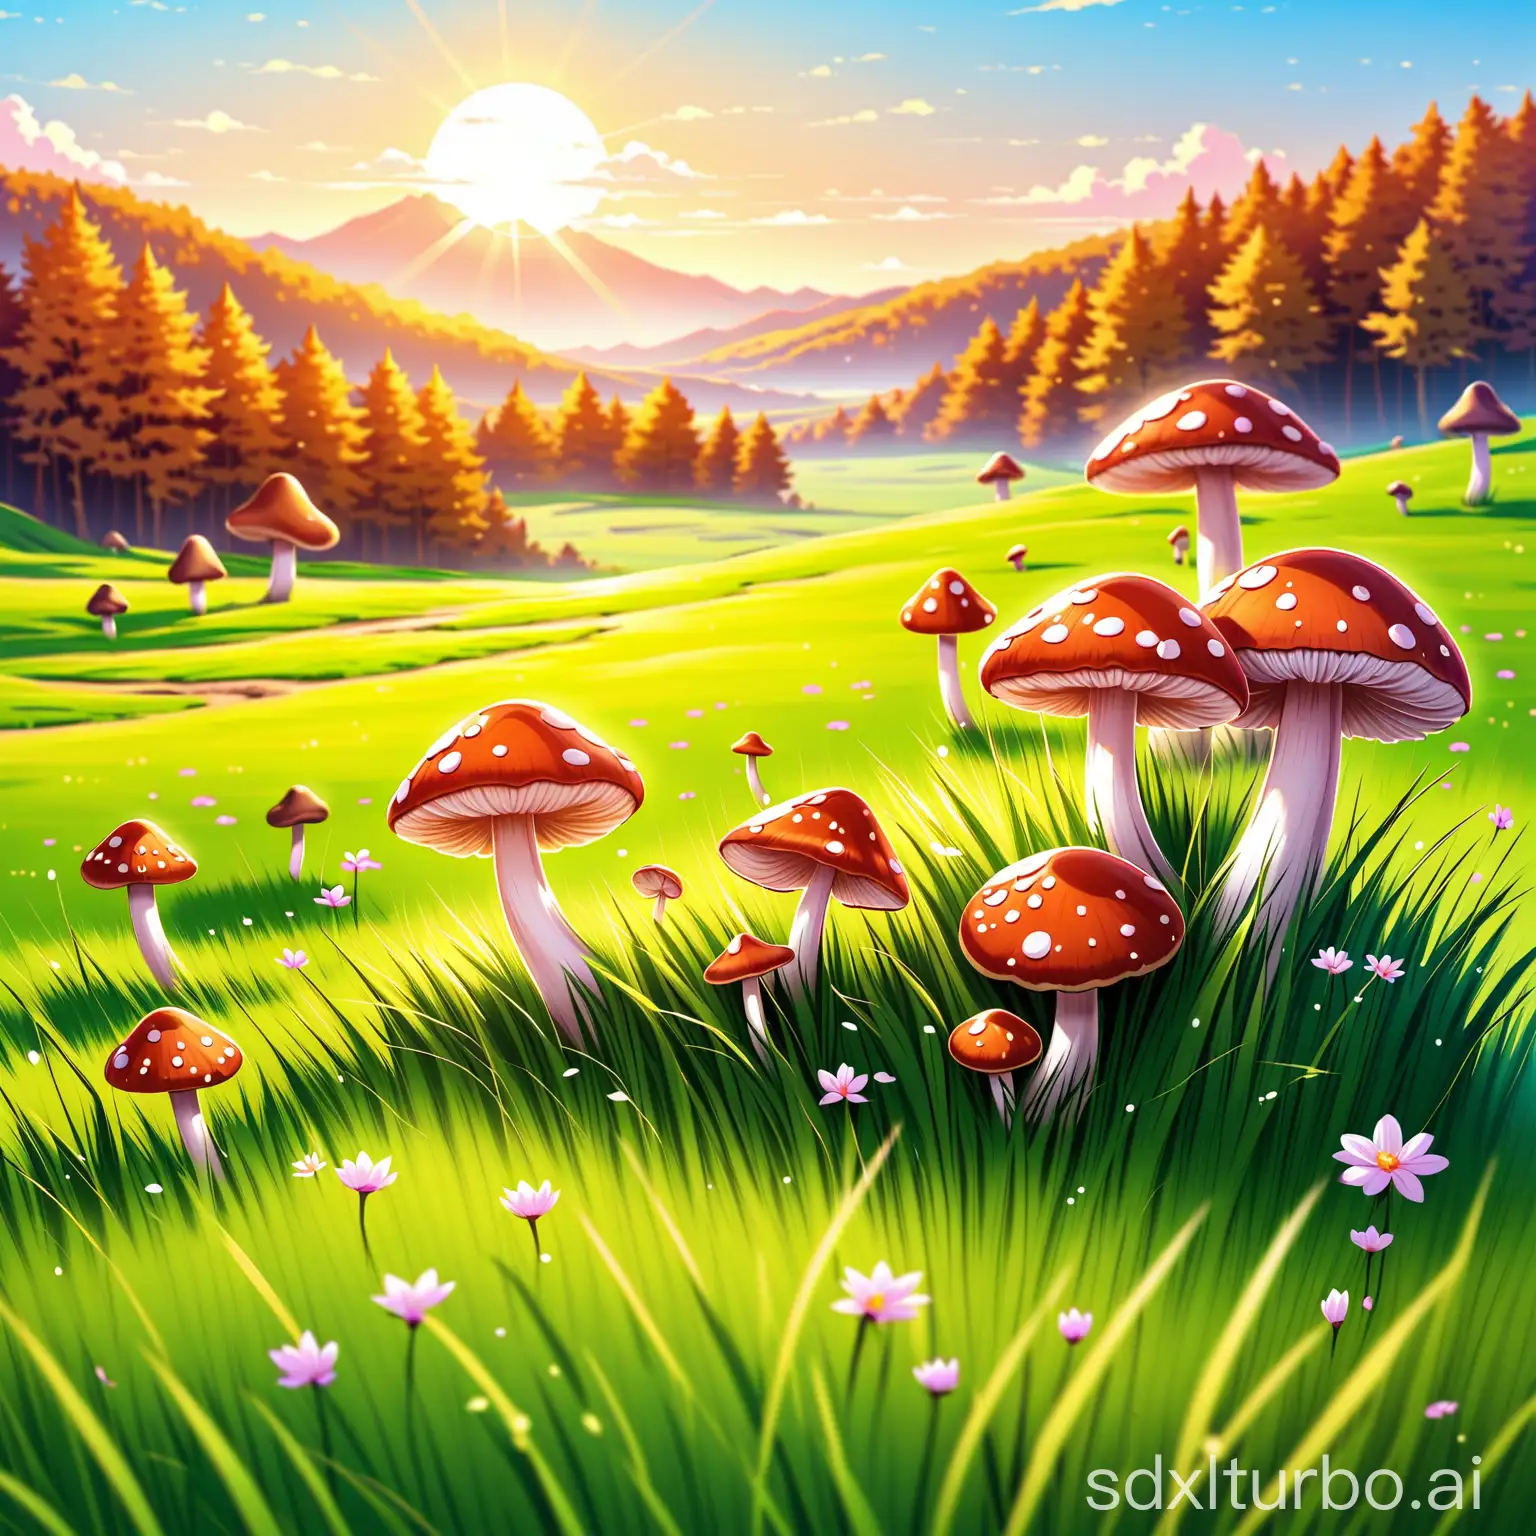 Vibrant-Mushrooms-Sprouting-in-Grassy-Meadow